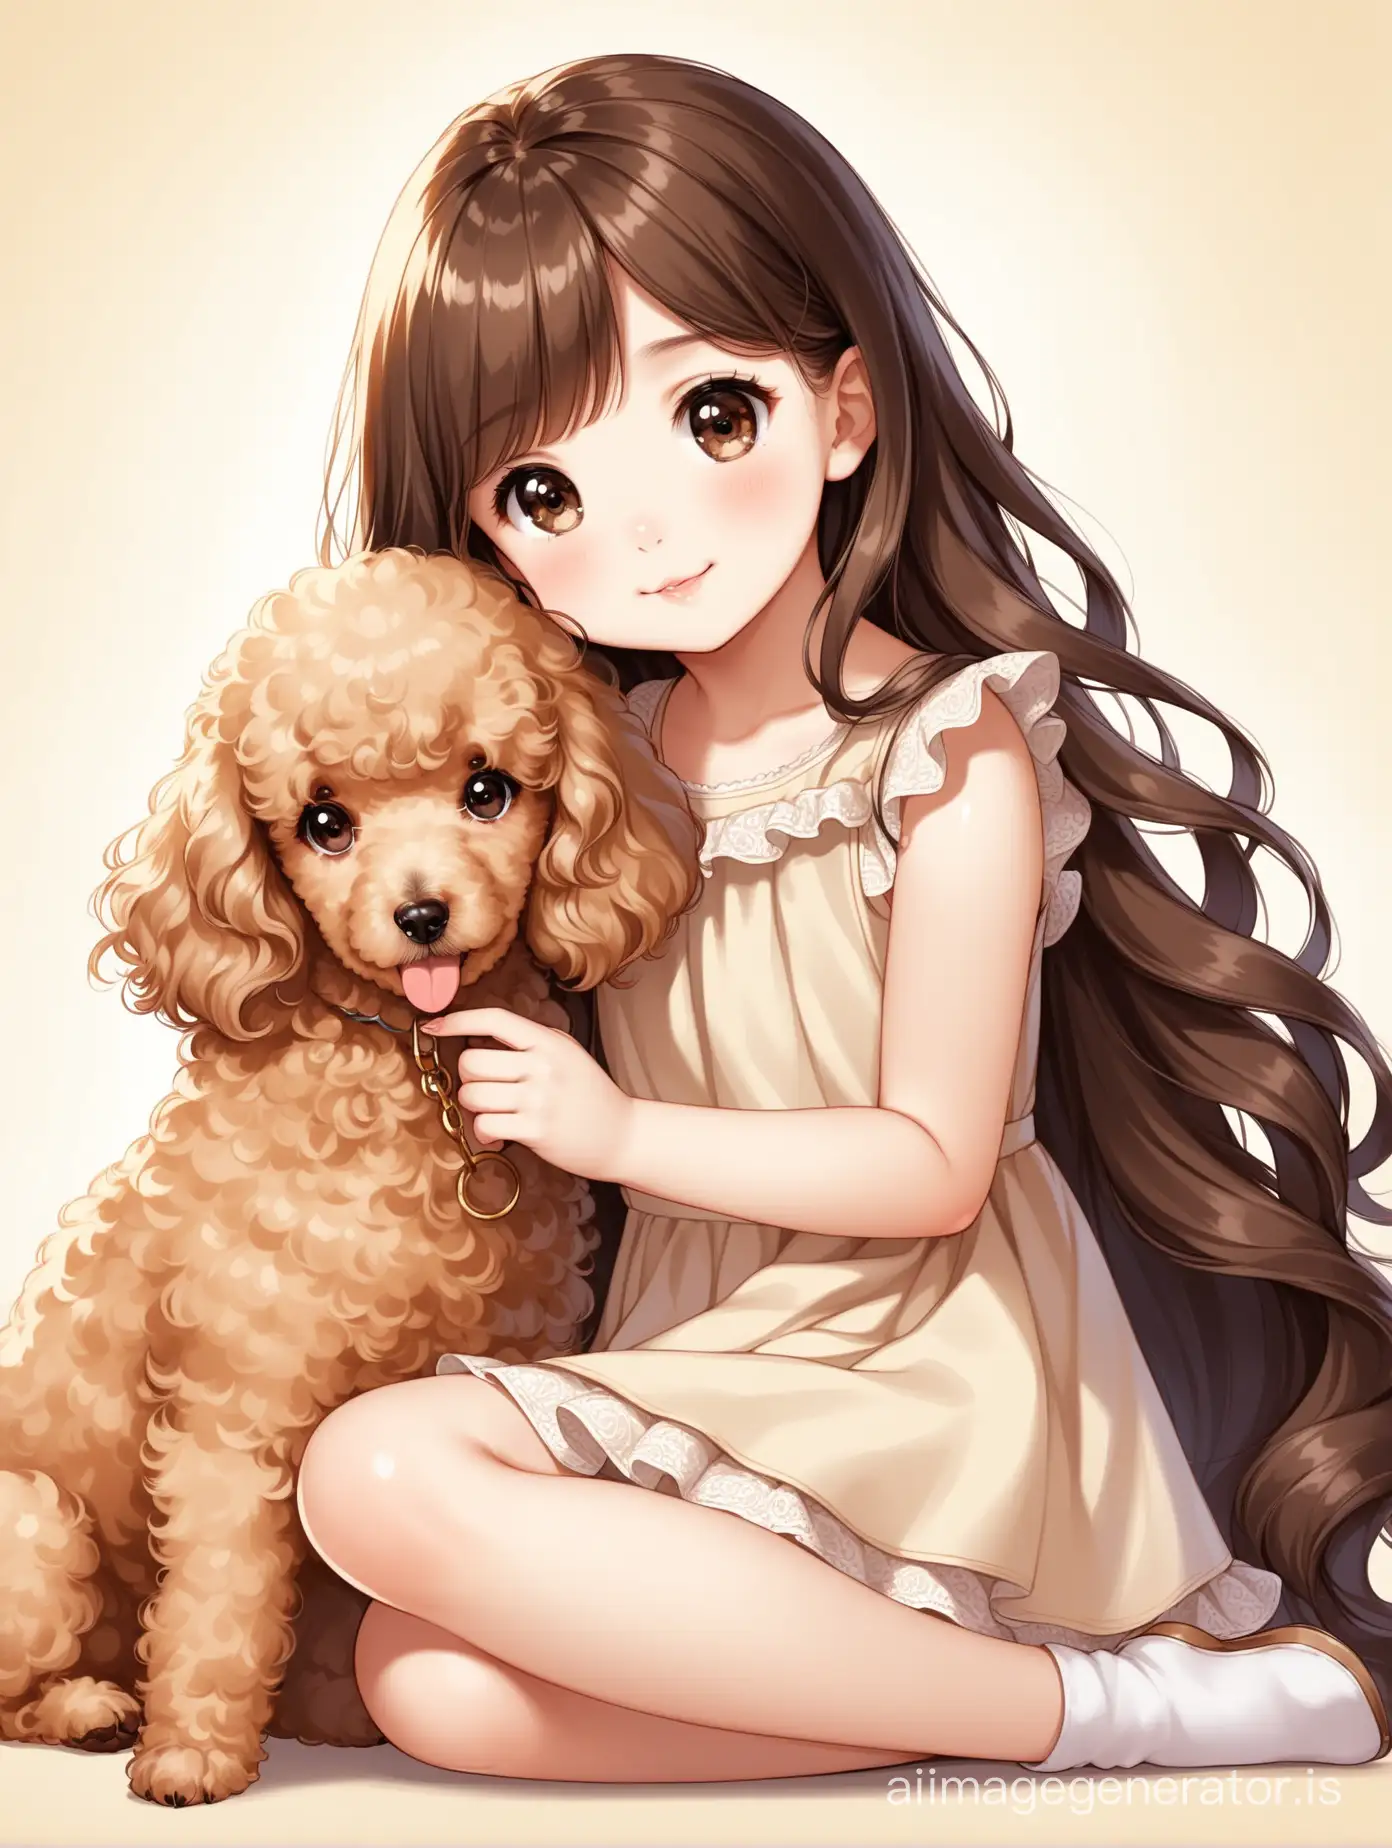 Adorable-Little-Girl-with-Long-Hair-Playing-with-Beige-Poodle-Puppy